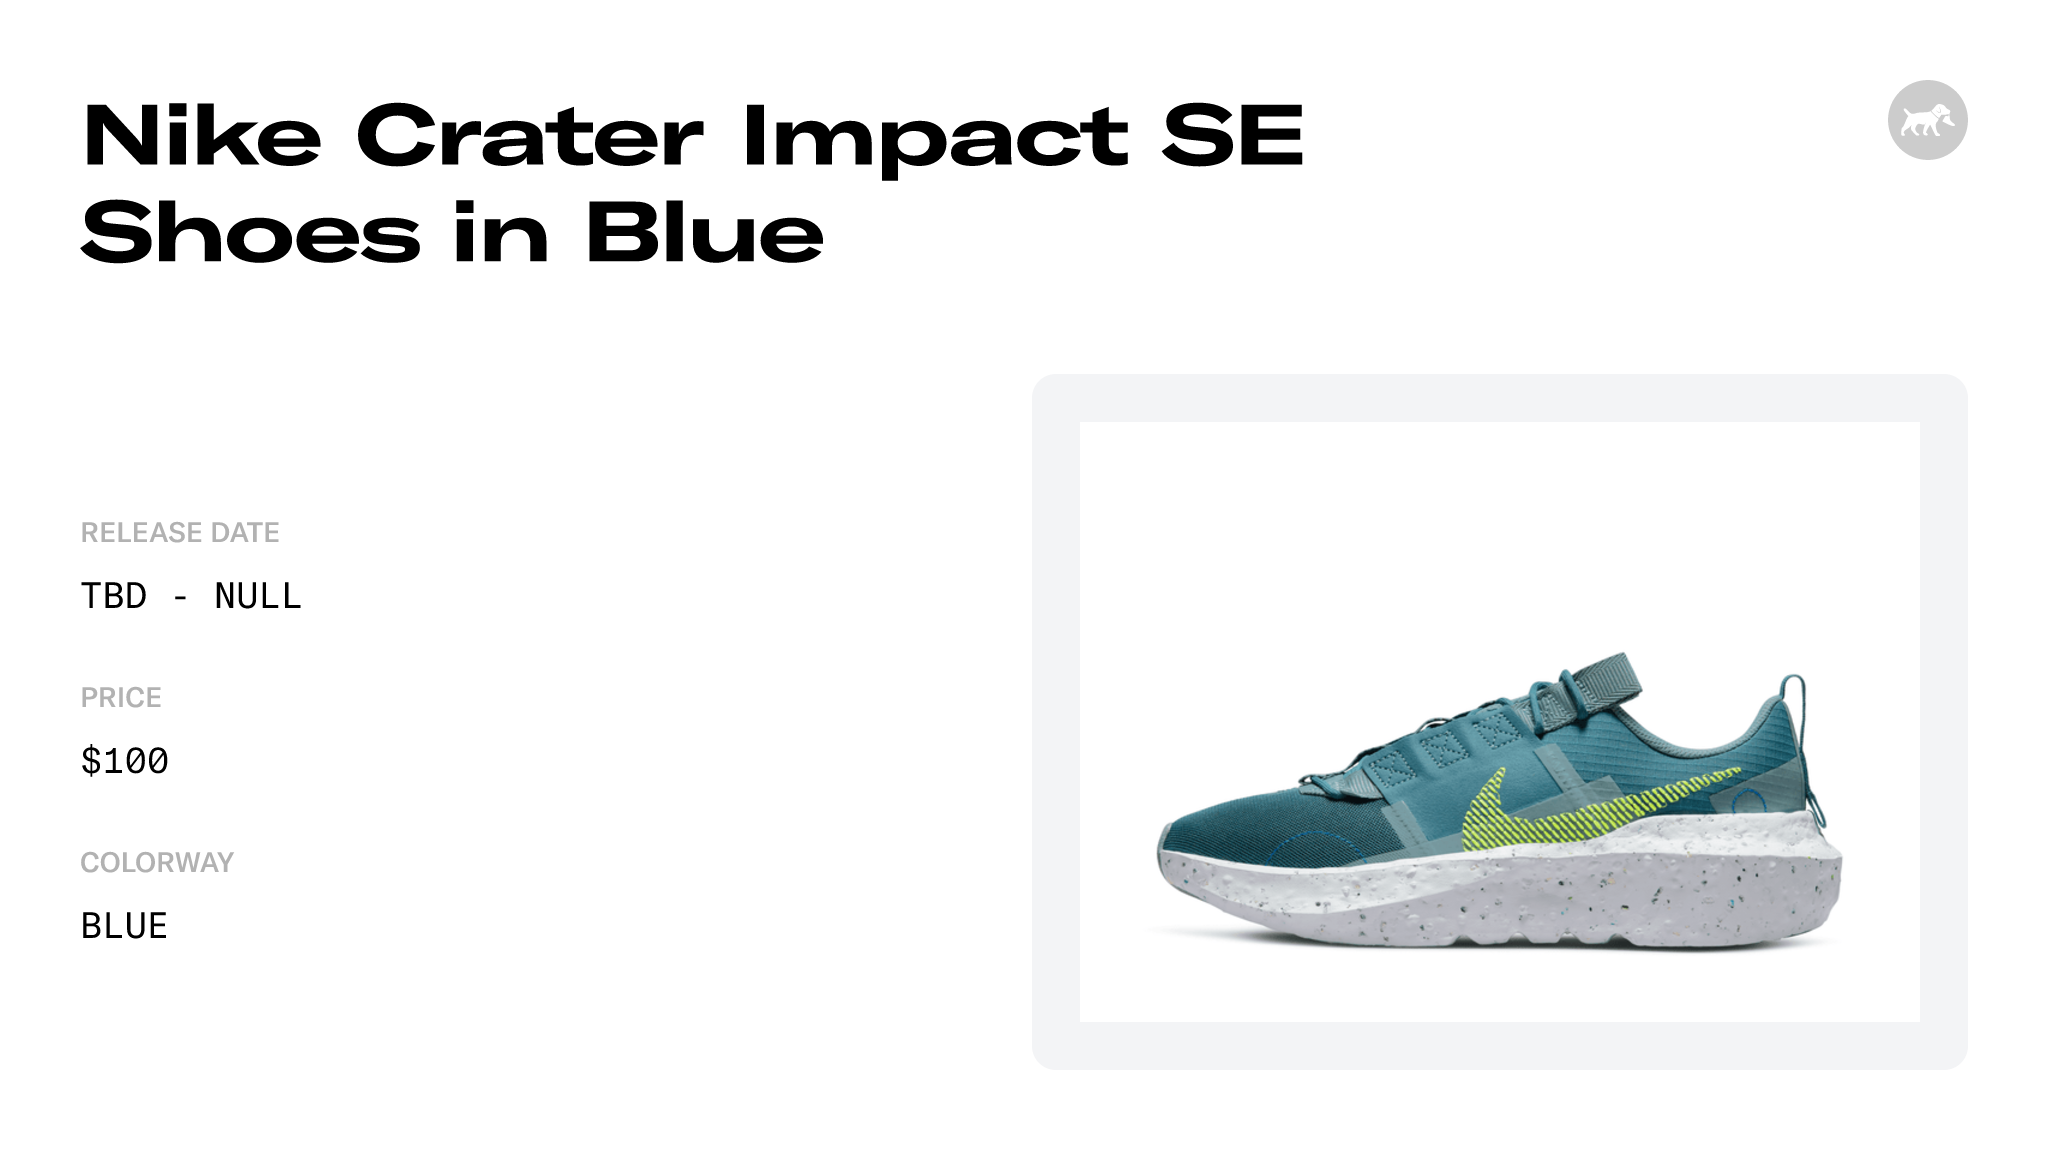 Nike Crater Impact SE Shoes in Blue - DJ6308-002 Raffles and Release Date